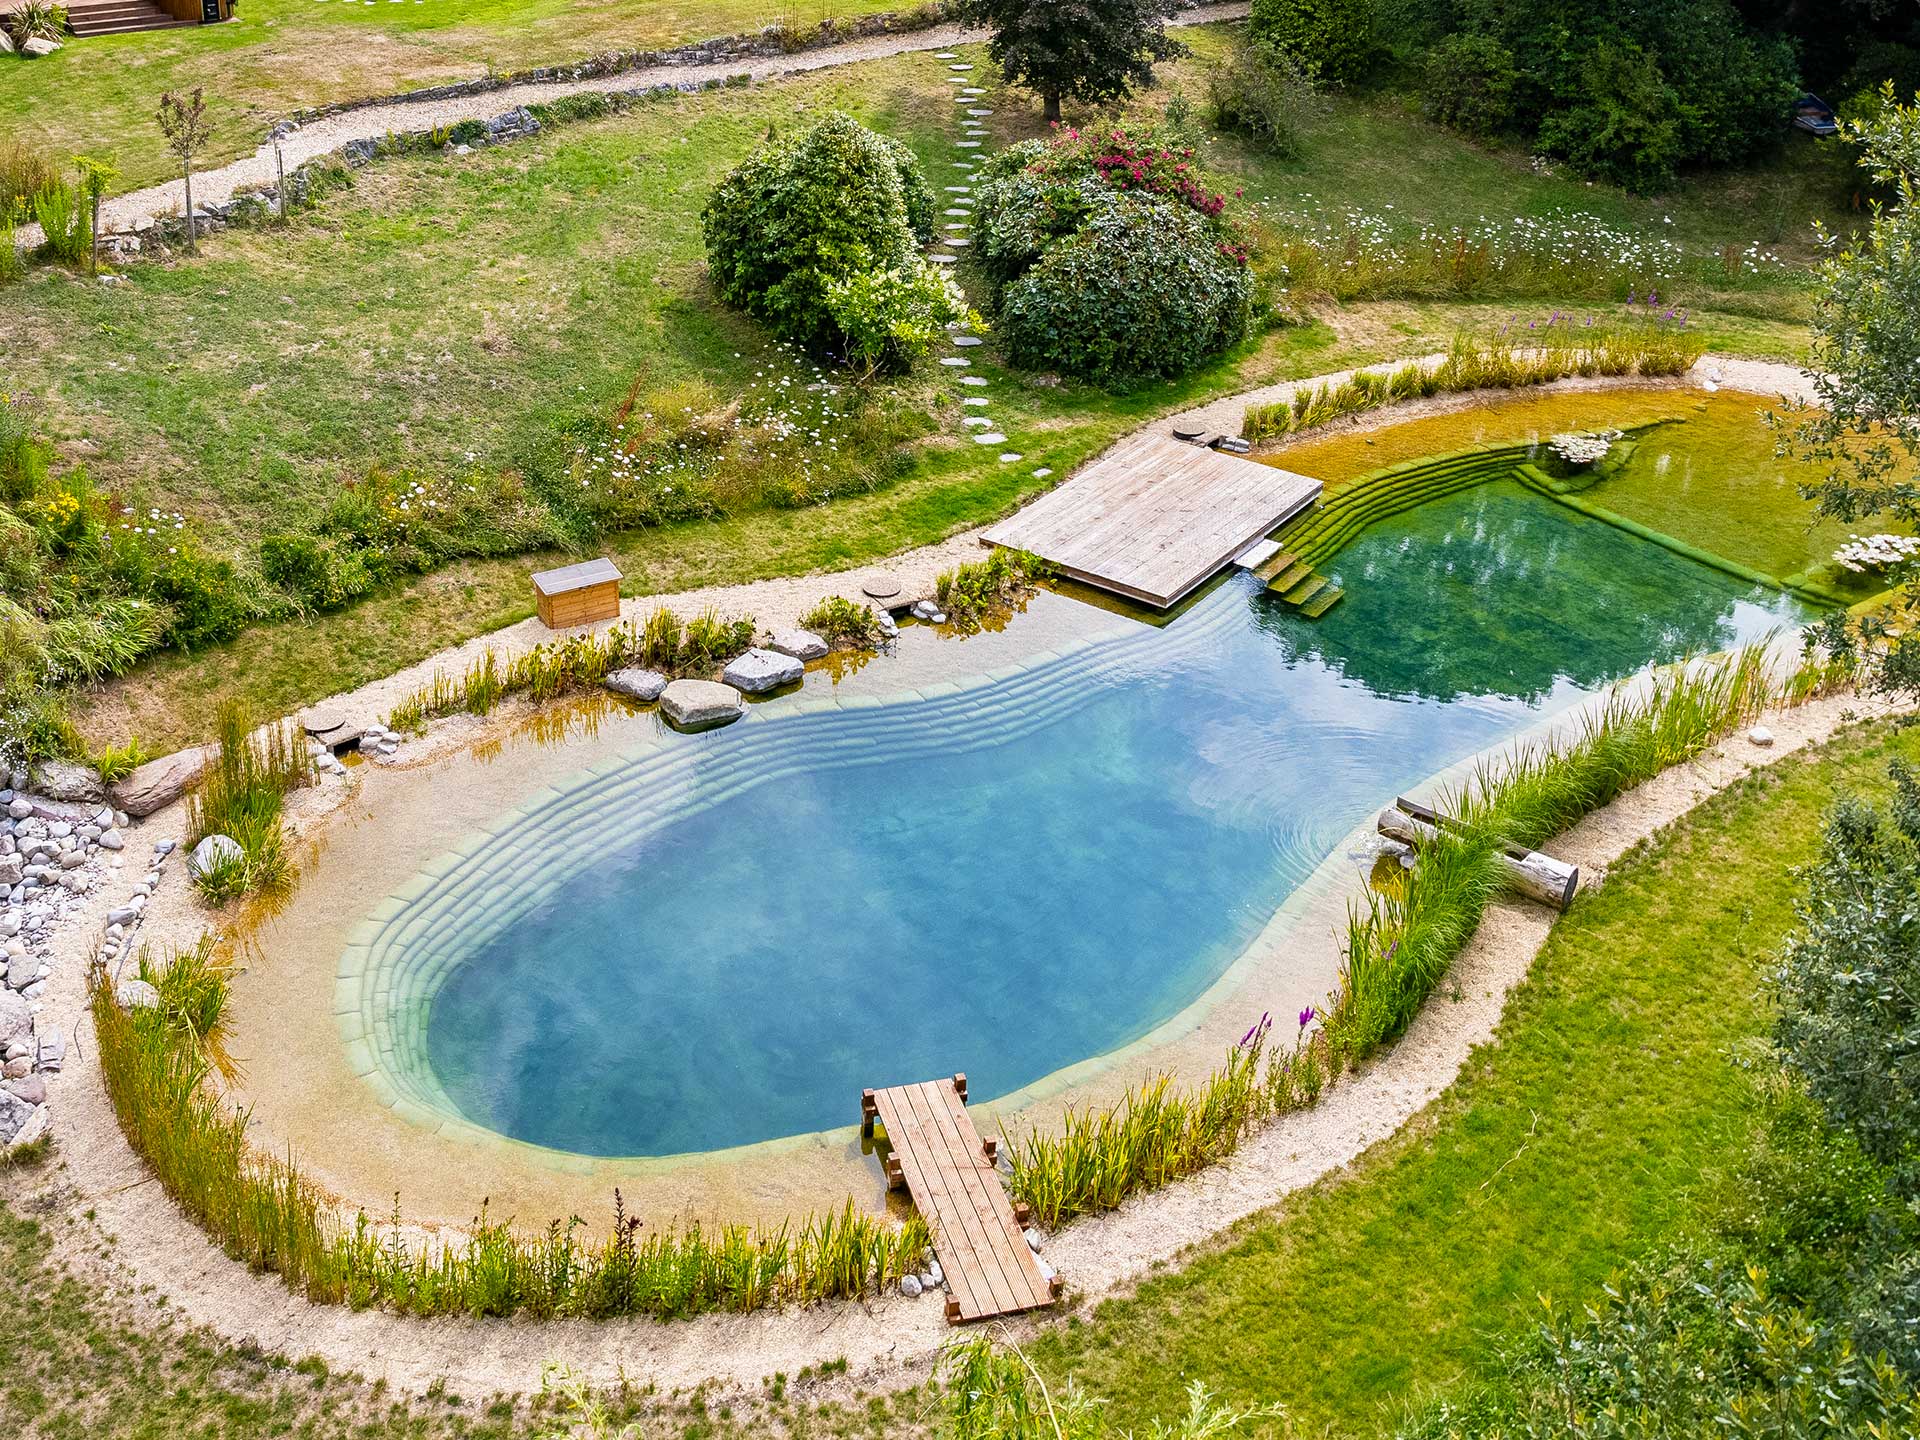 It's fairly easy to maintain your natural swimming pool